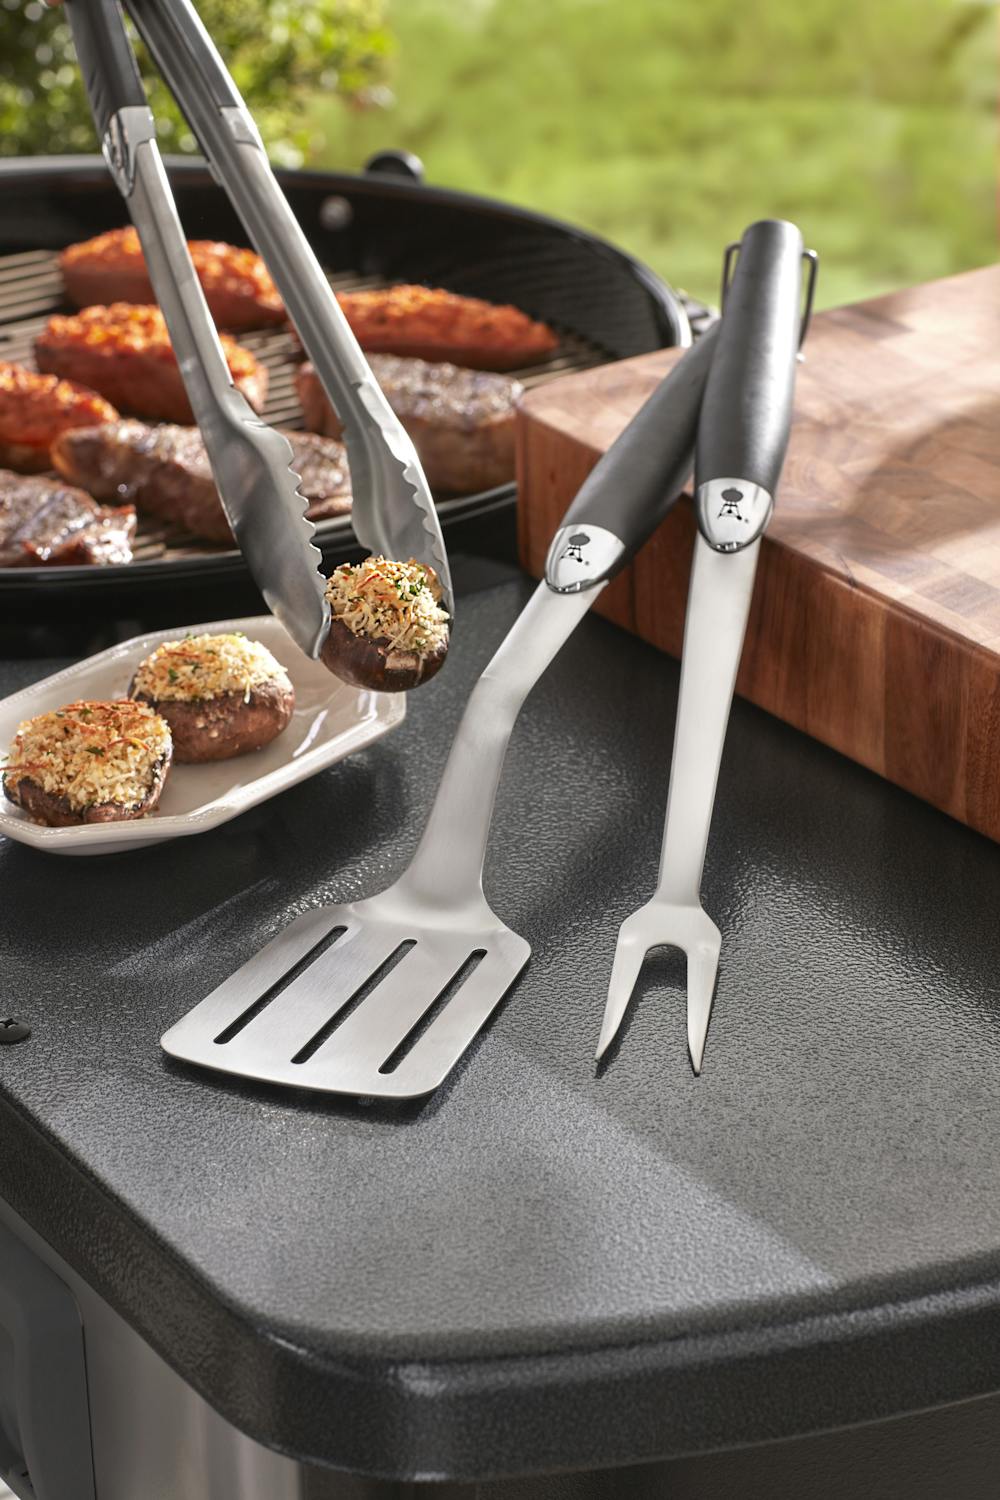 Weber Precision Tongs & Spatula Grilling Tool Set, Stainless Steel